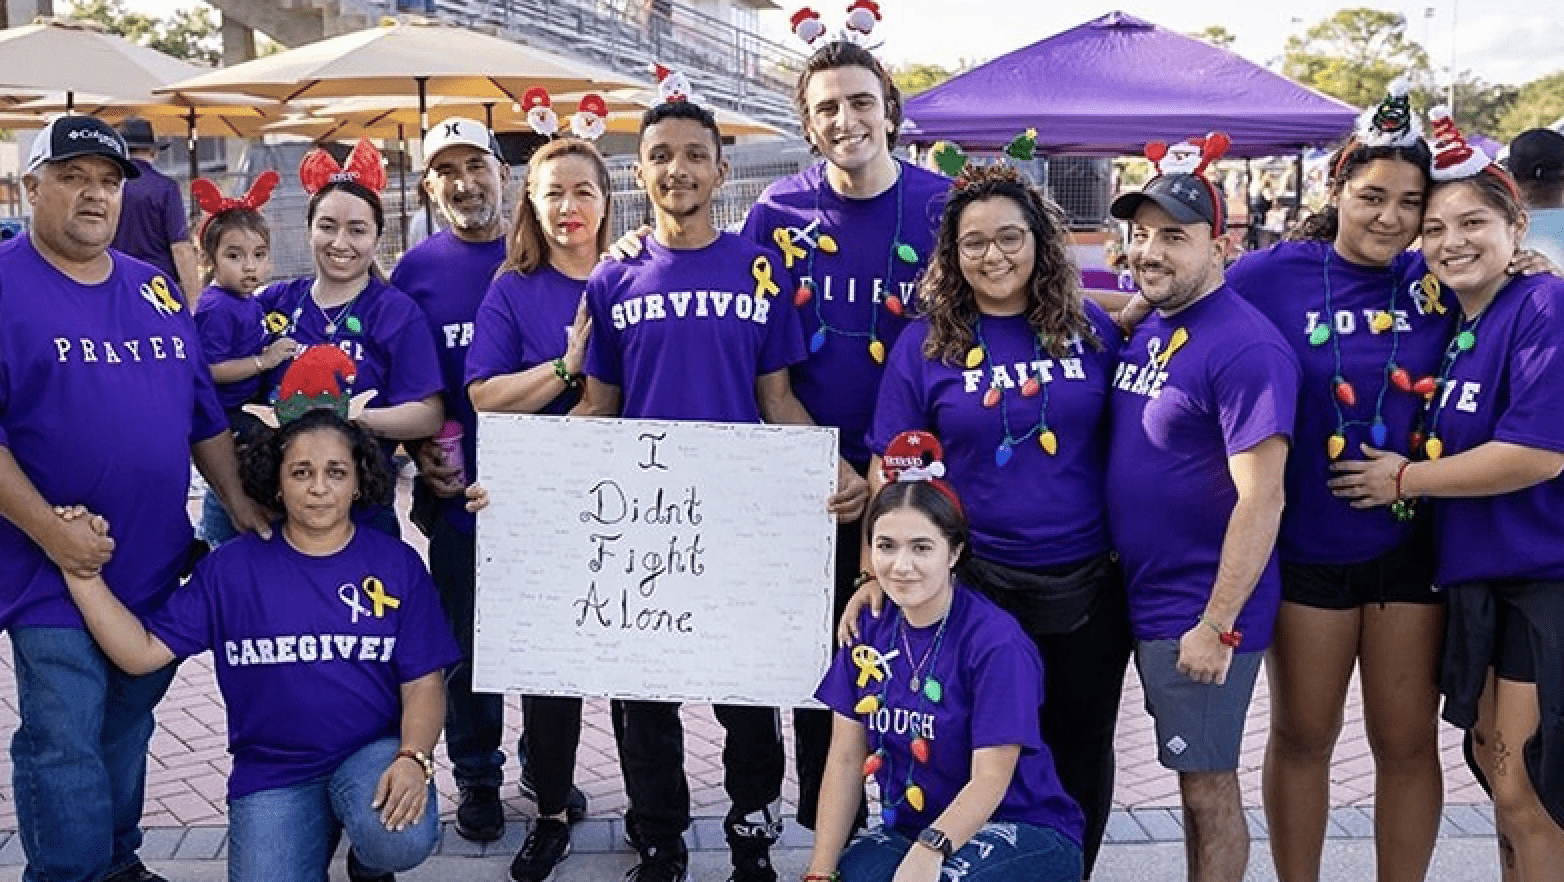 Unite to End Cancer: Hollywood-Themed Relay For Life Event Held in Parkland